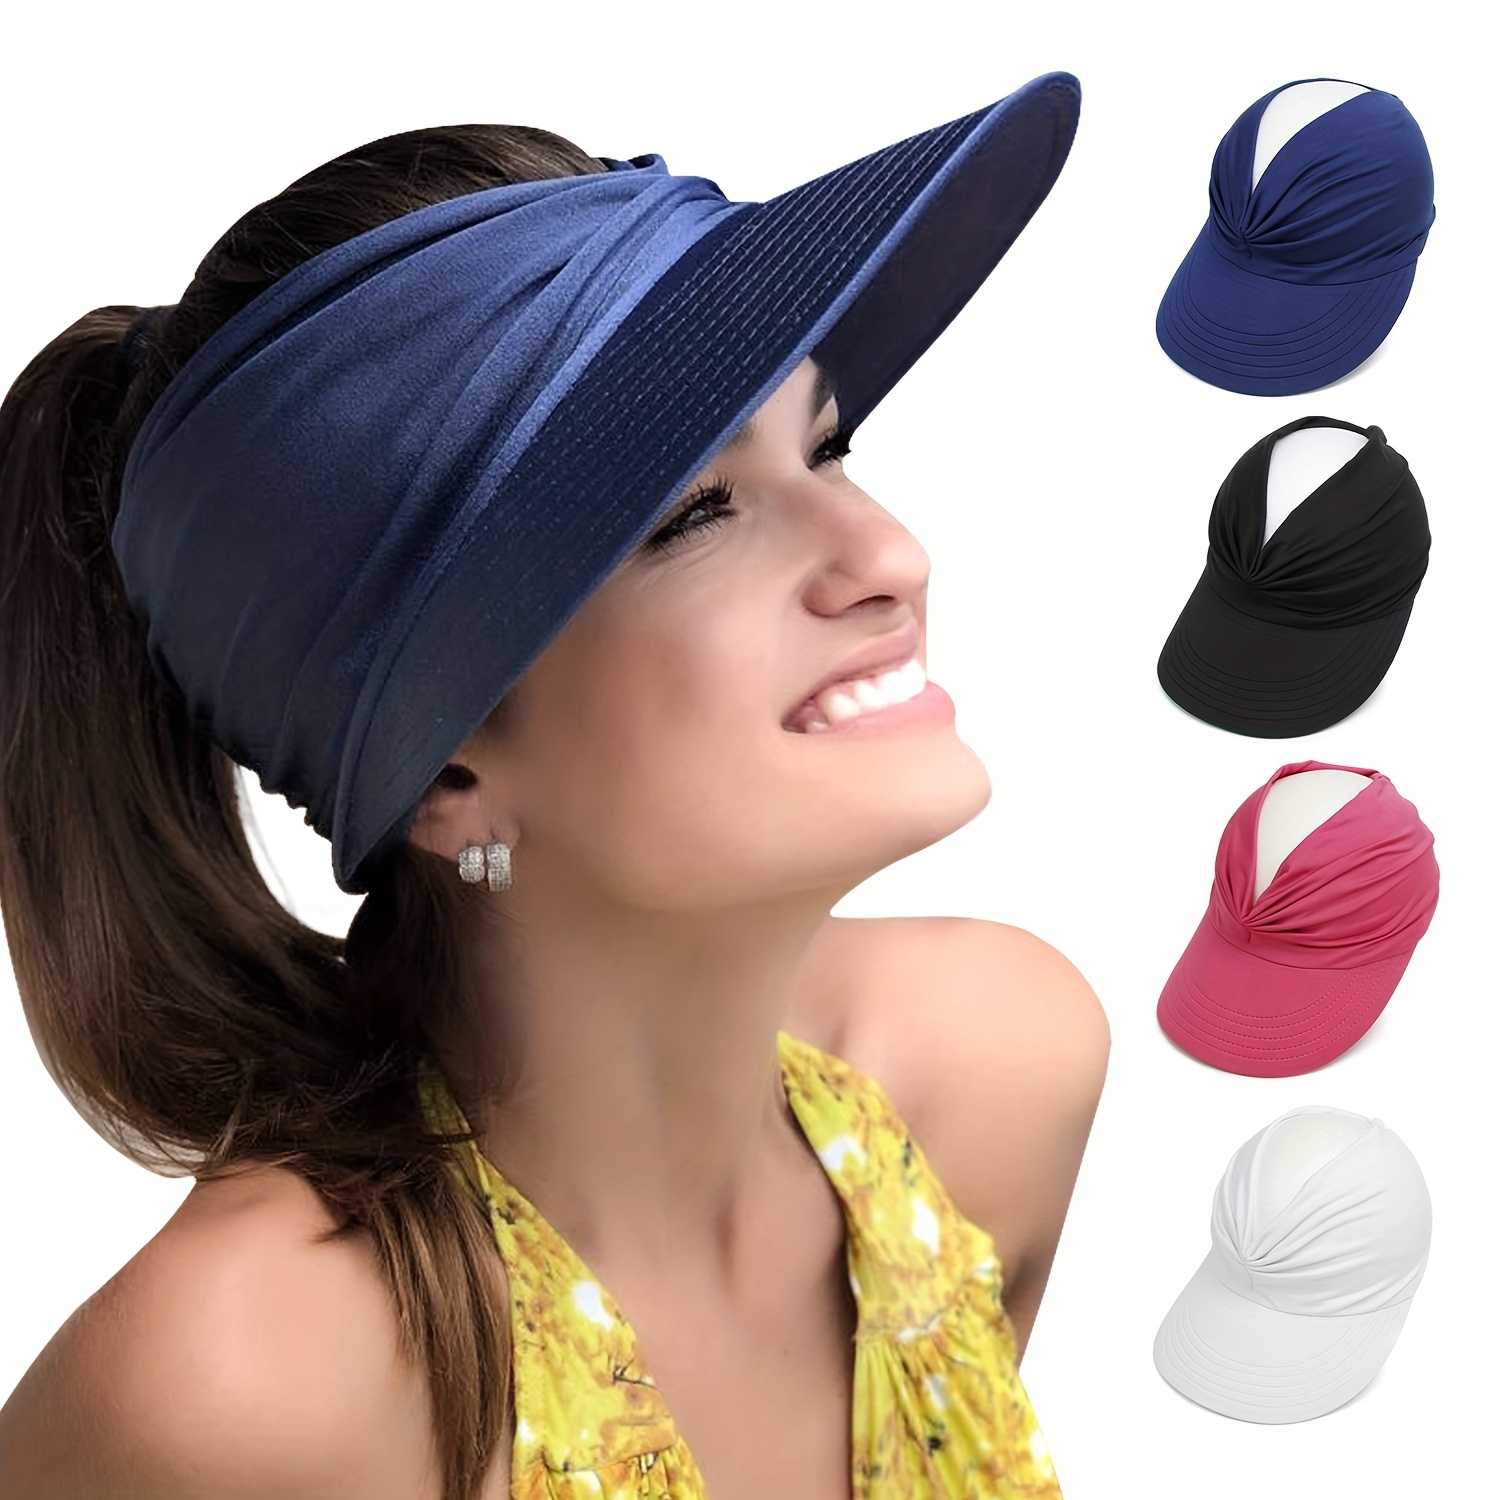 

Women's Wide Brim Sun Hat With Pleated Visor - Perfect For Beach, Seaside, And Outdoor Sports - Provides Sun Protection And Style